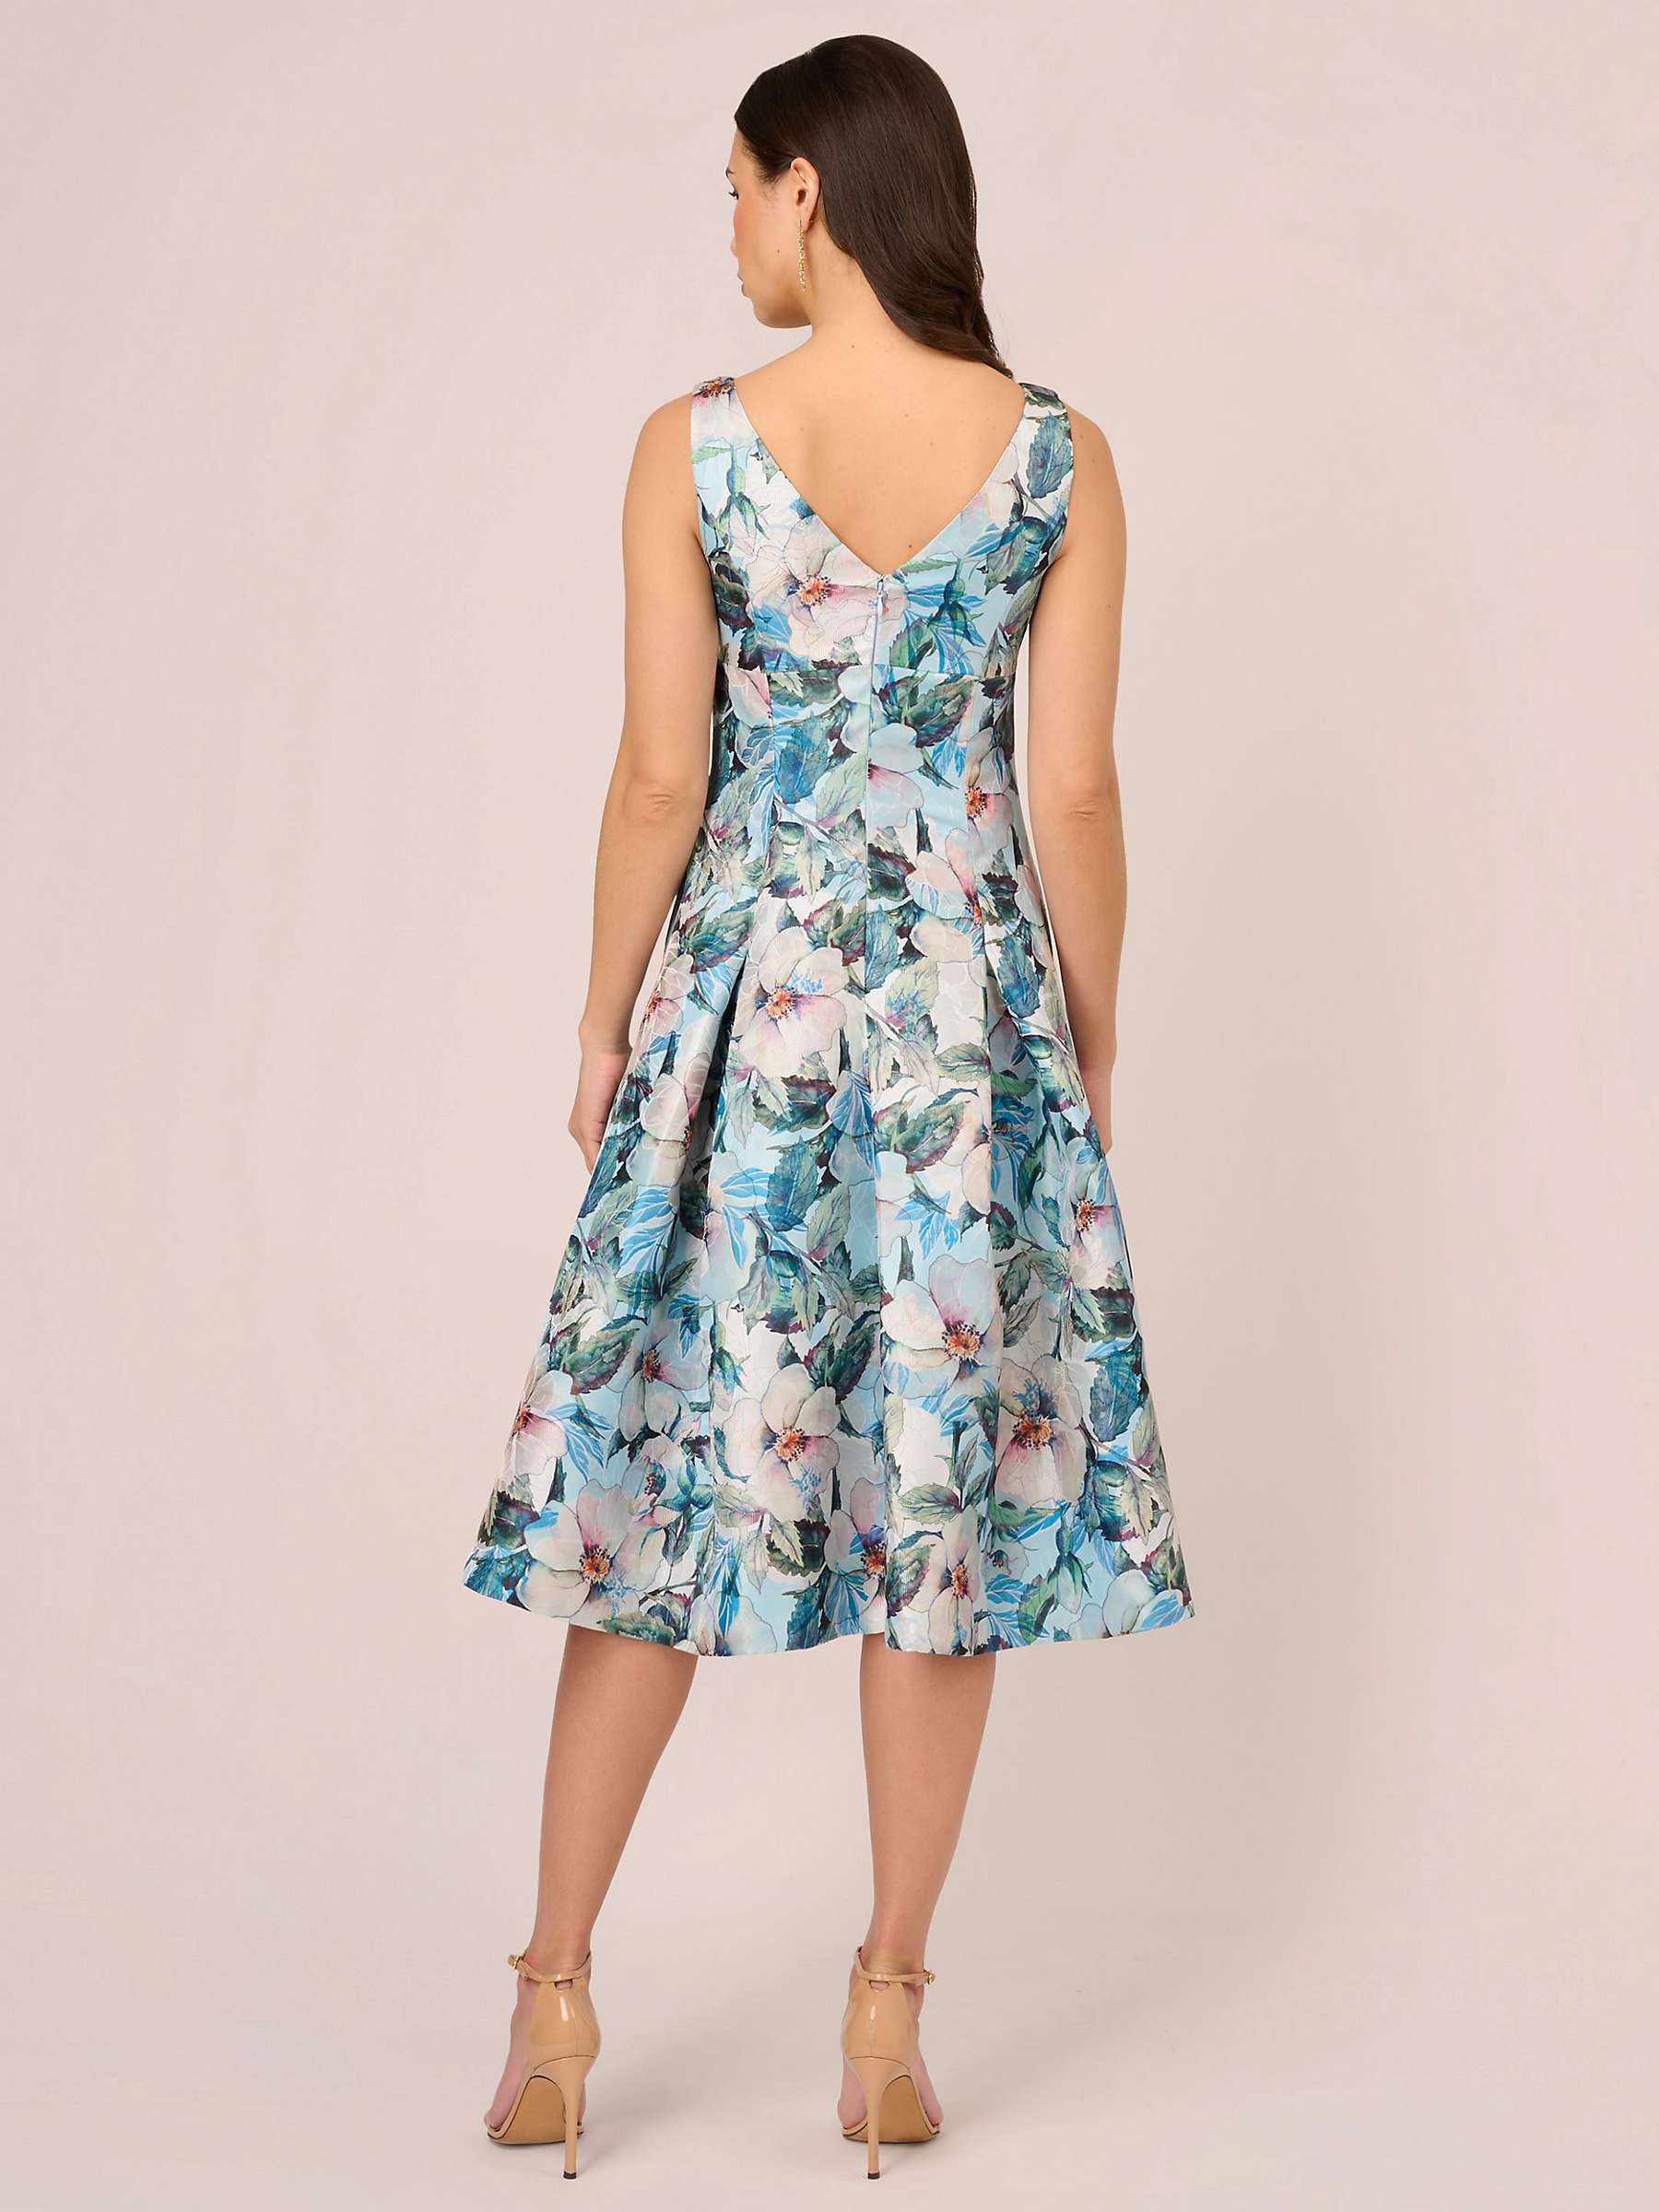 Buy Adrianna Papell Floral Jacquard Dress, Blue/Multi Online at johnlewis.com